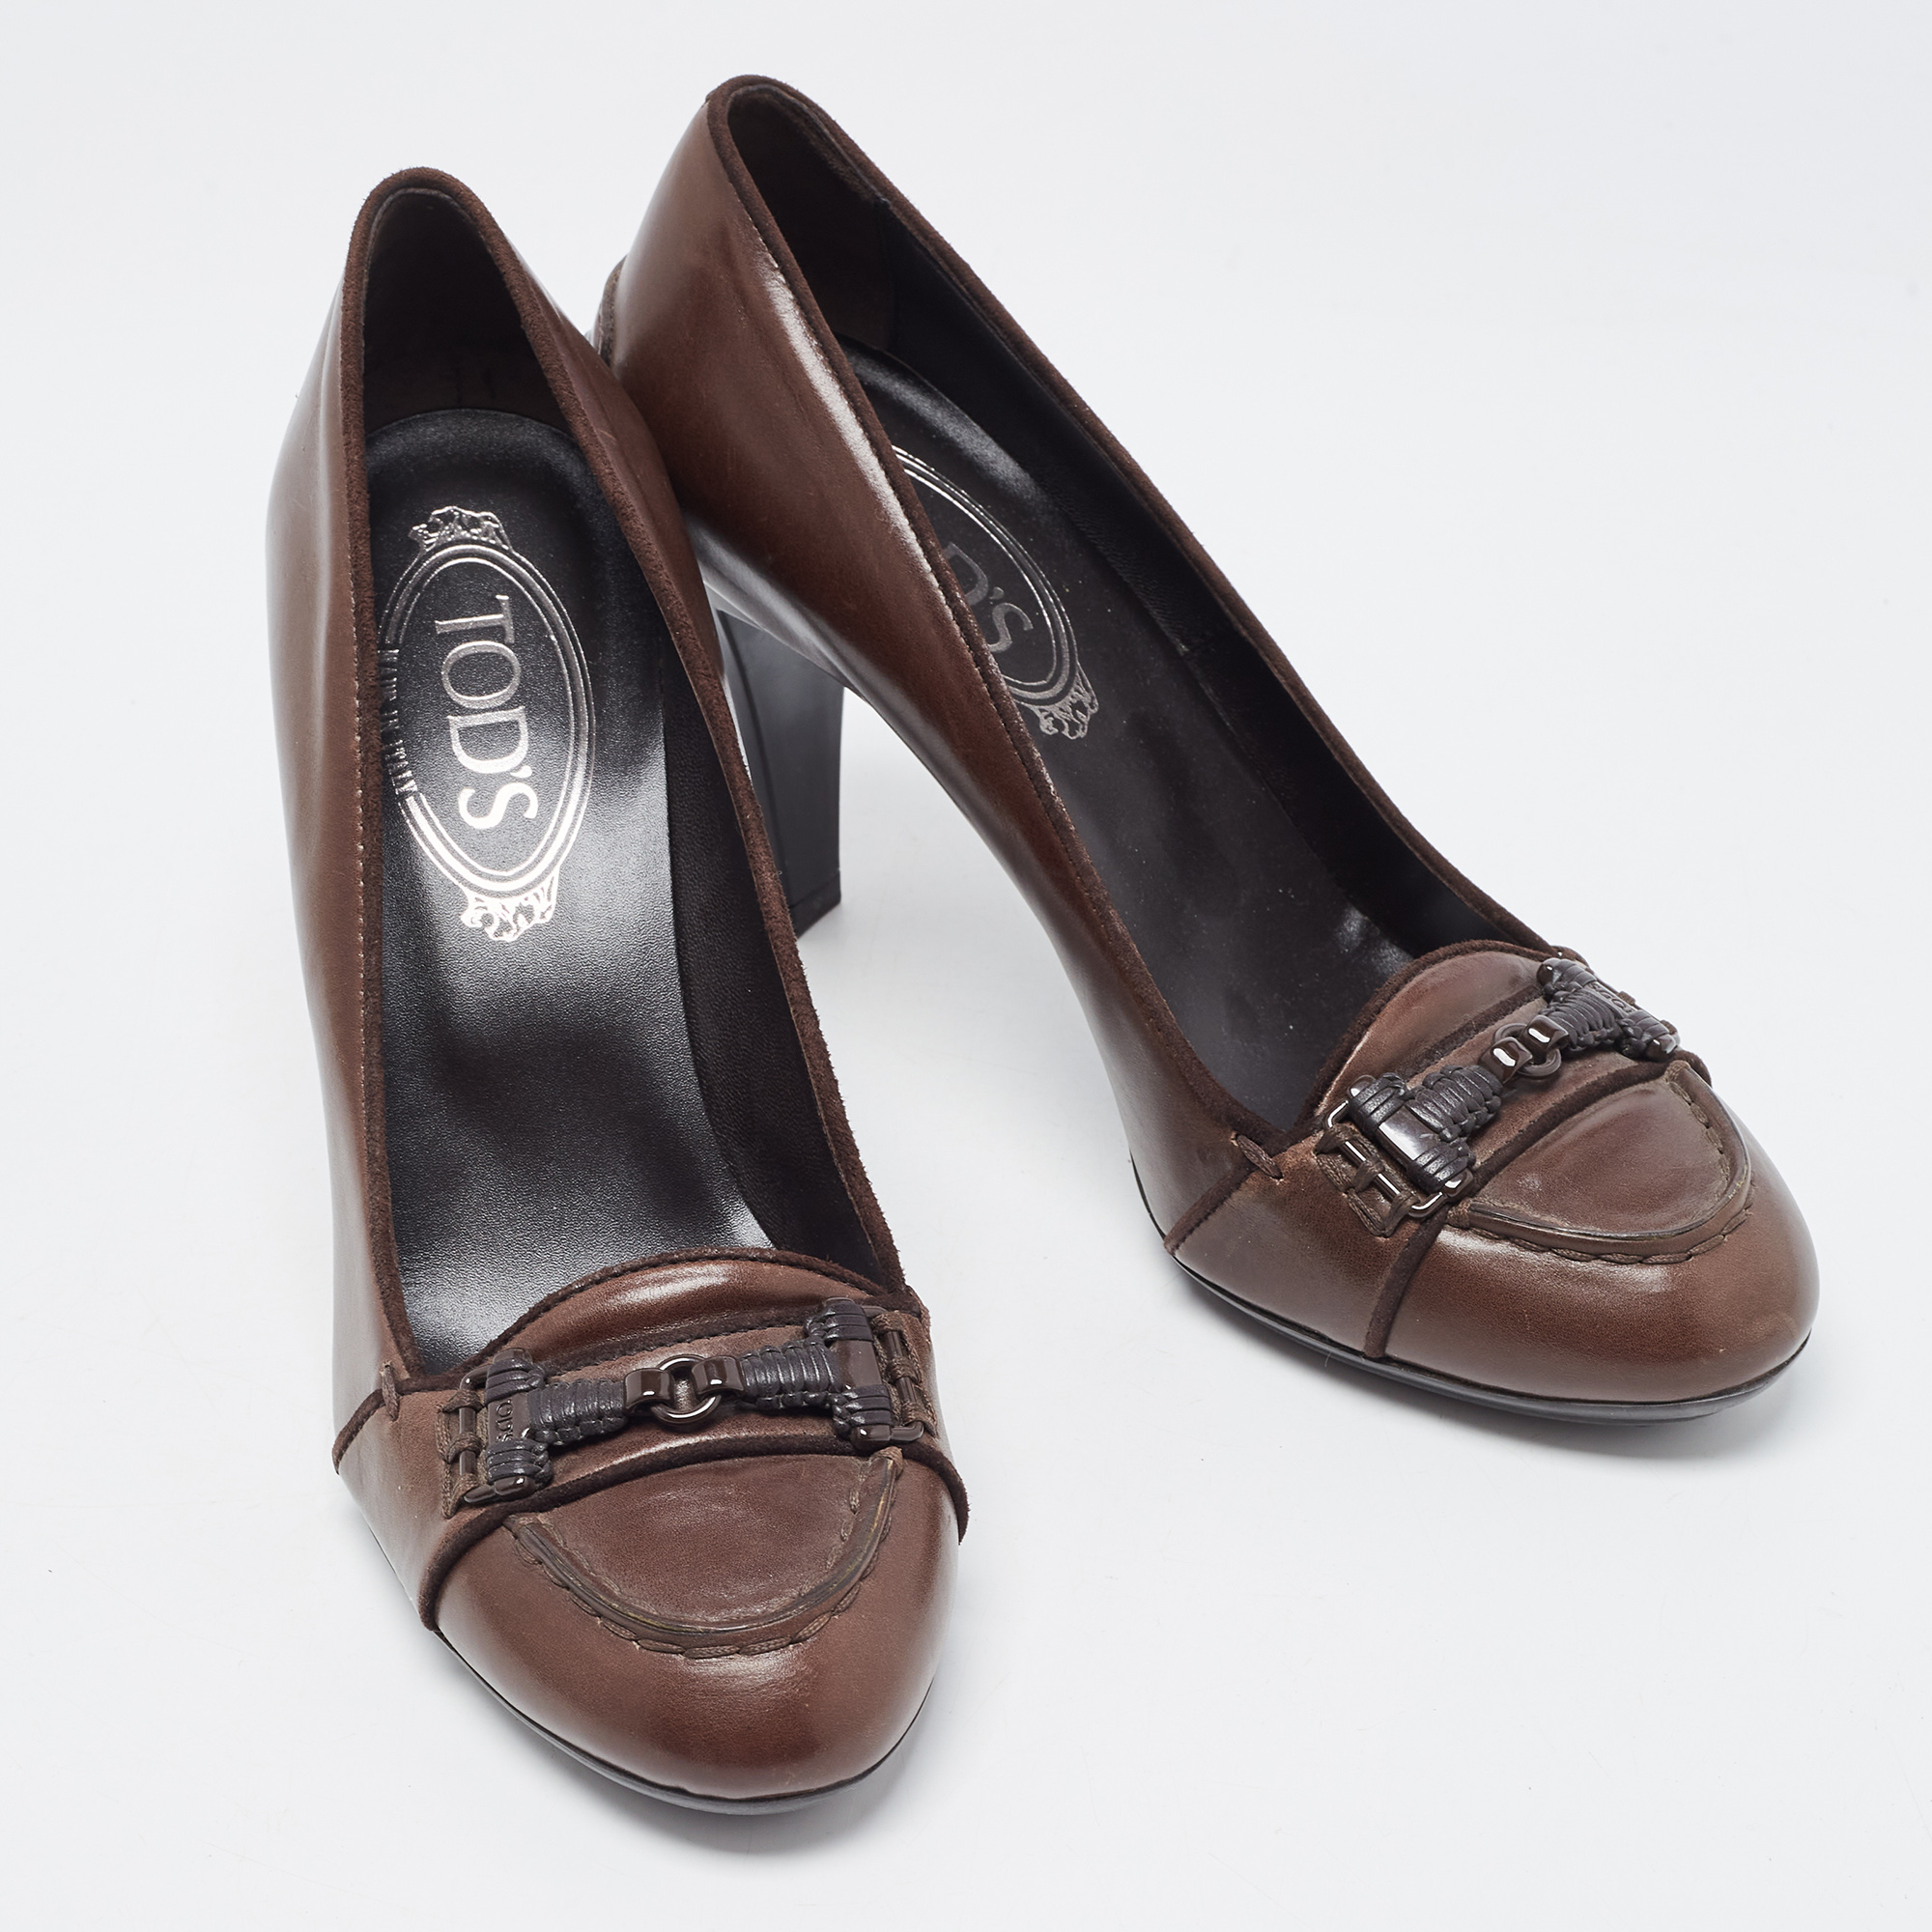 Tod's Dark Brown Leather Double T Loafer Pumps Size 37